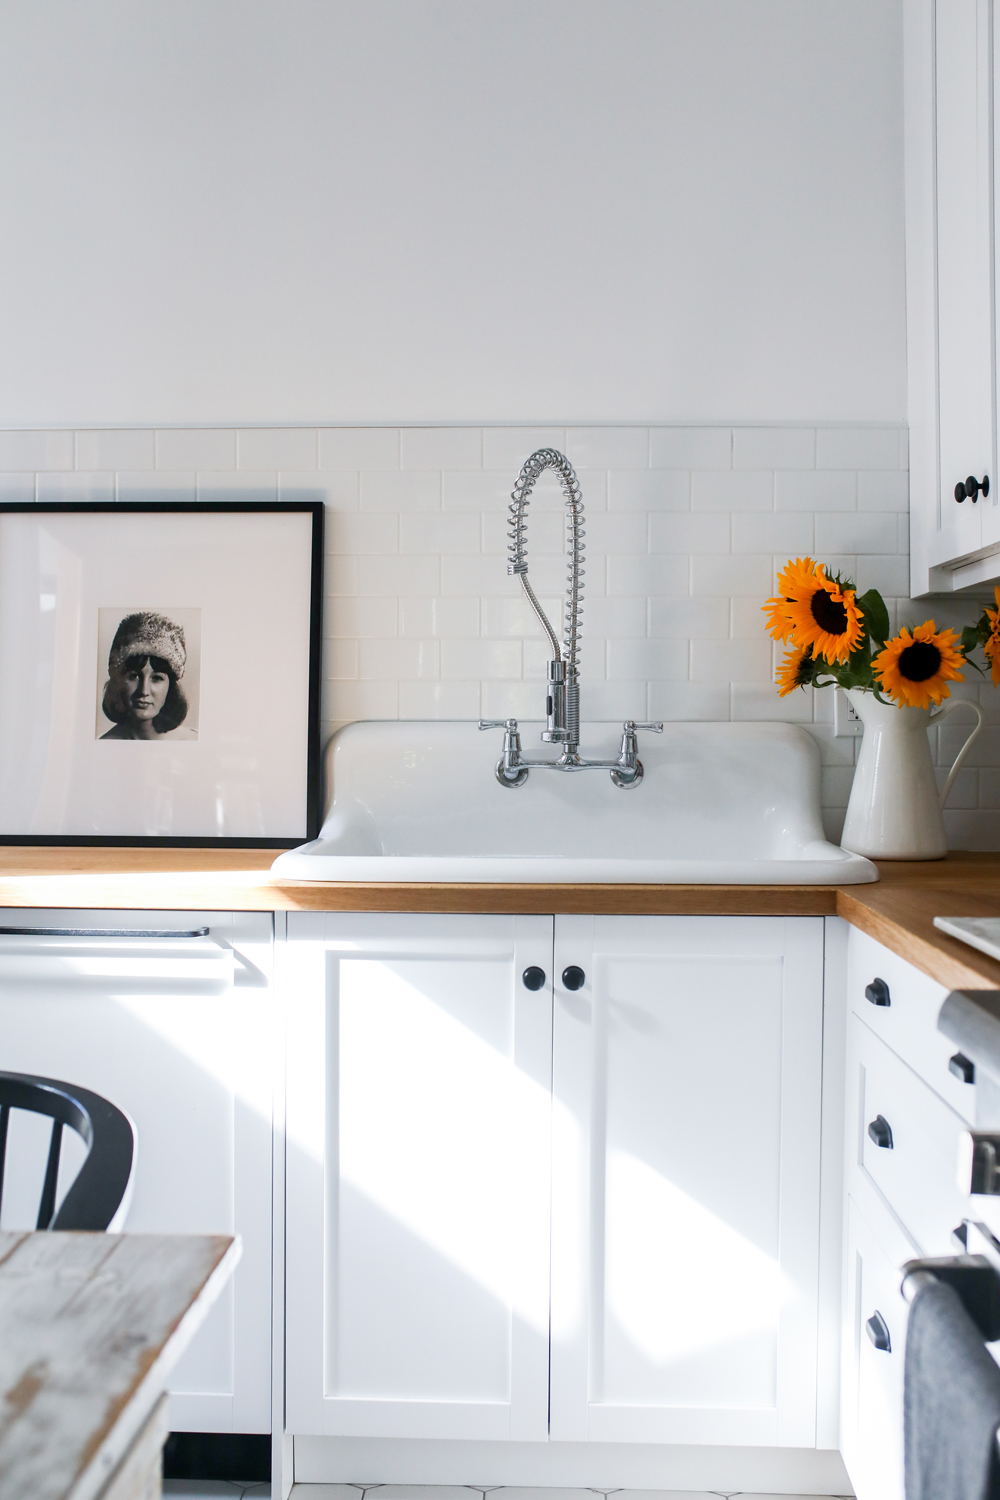 Farmhouse-style sink with modern chrome faucet and black knobs